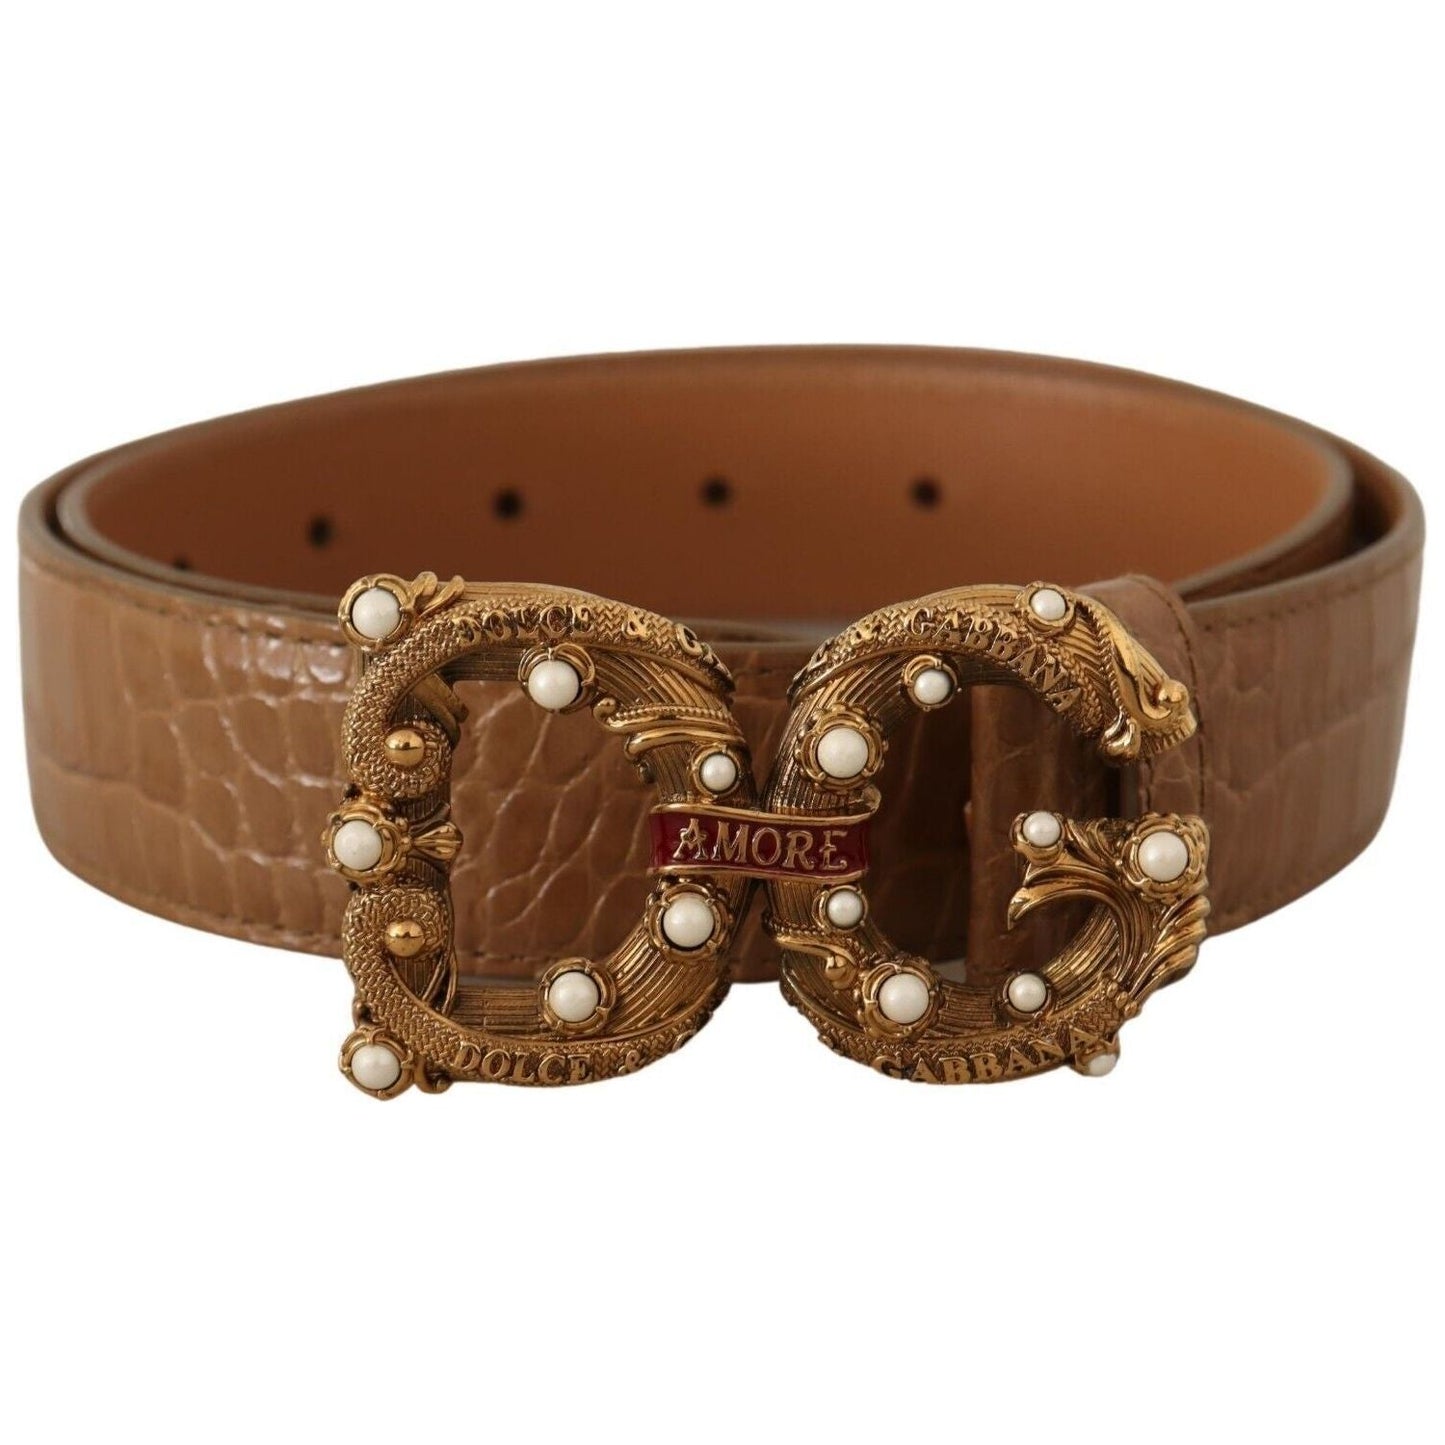 Dolce & Gabbana Elegant Croco Leather Amore Belt with Pearls WOMAN BELTS brown-crocodile-pattern-leather-logo-amore-belt